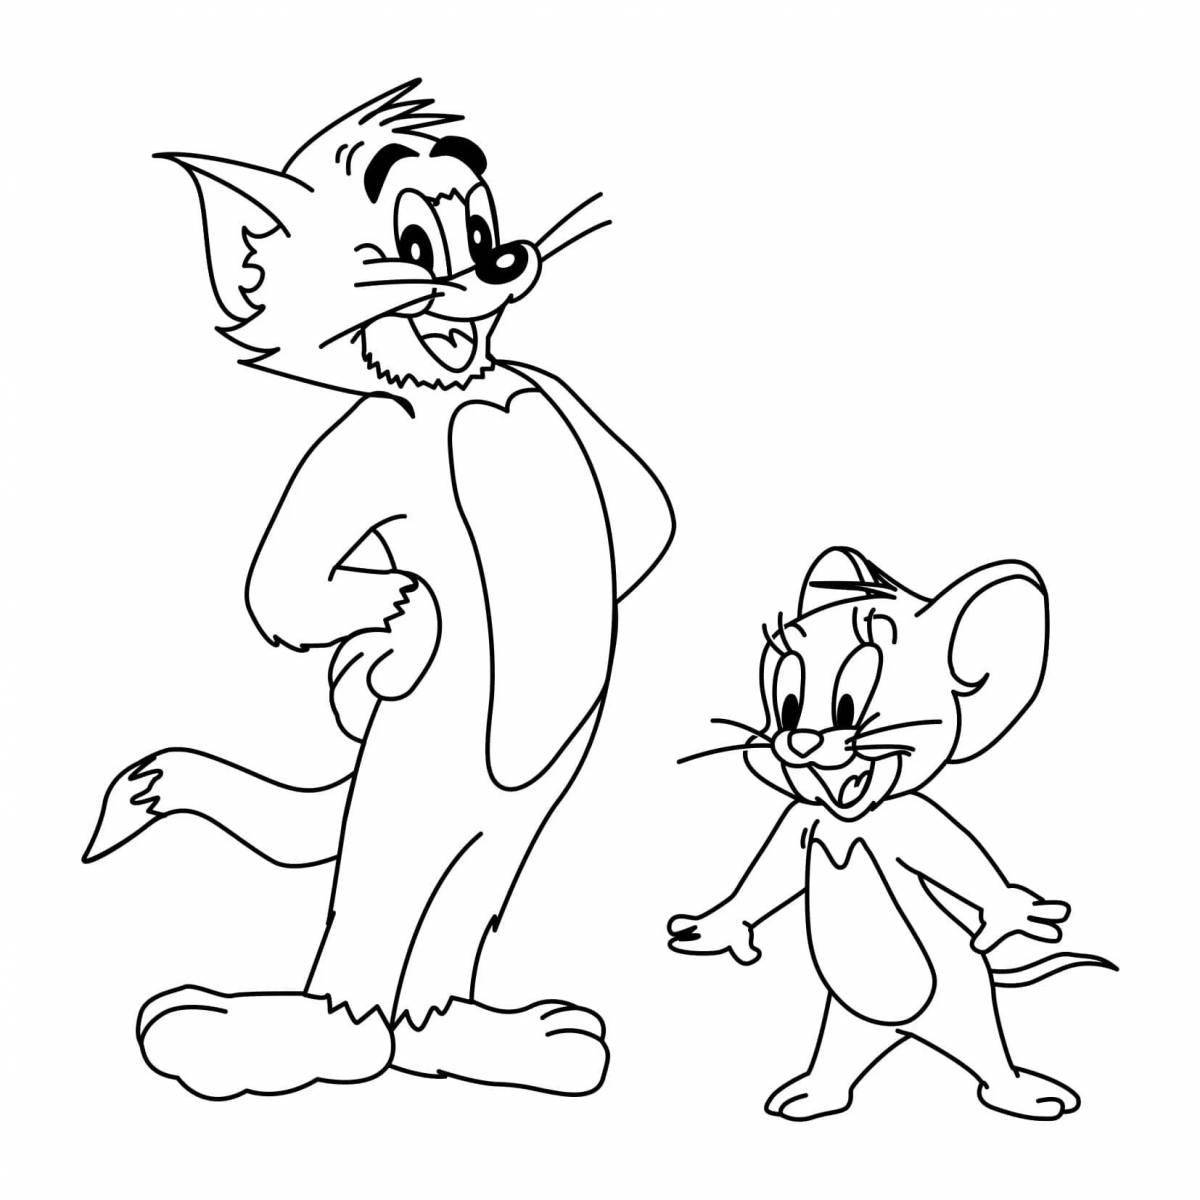 Exciting tom and jerry coloring book